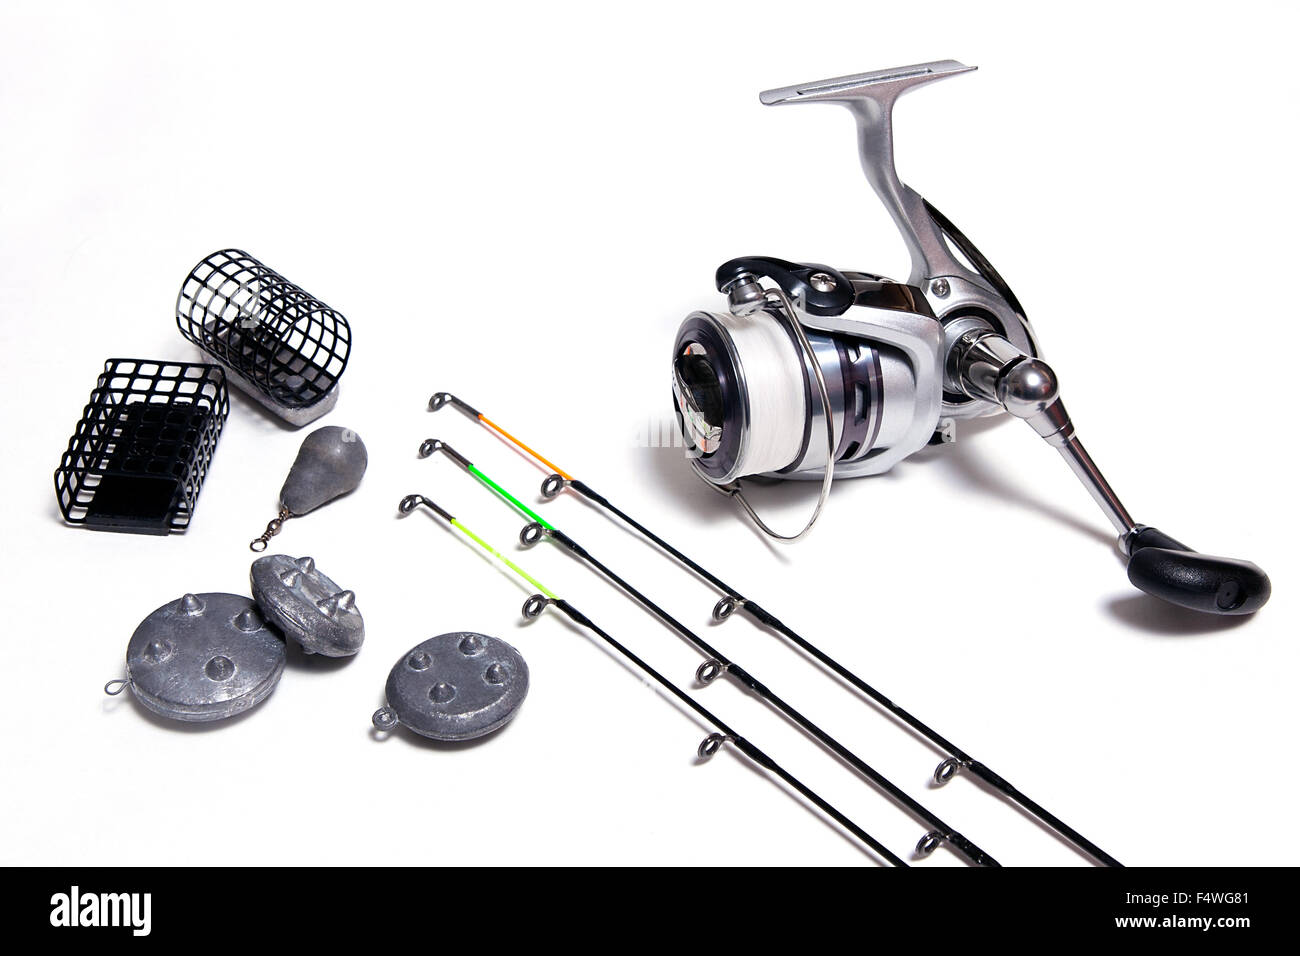 https://c8.alamy.com/comp/F4WG81/fishing-feeder-and-reel-with-accessories-on-white-background-fishing-F4WG81.jpg